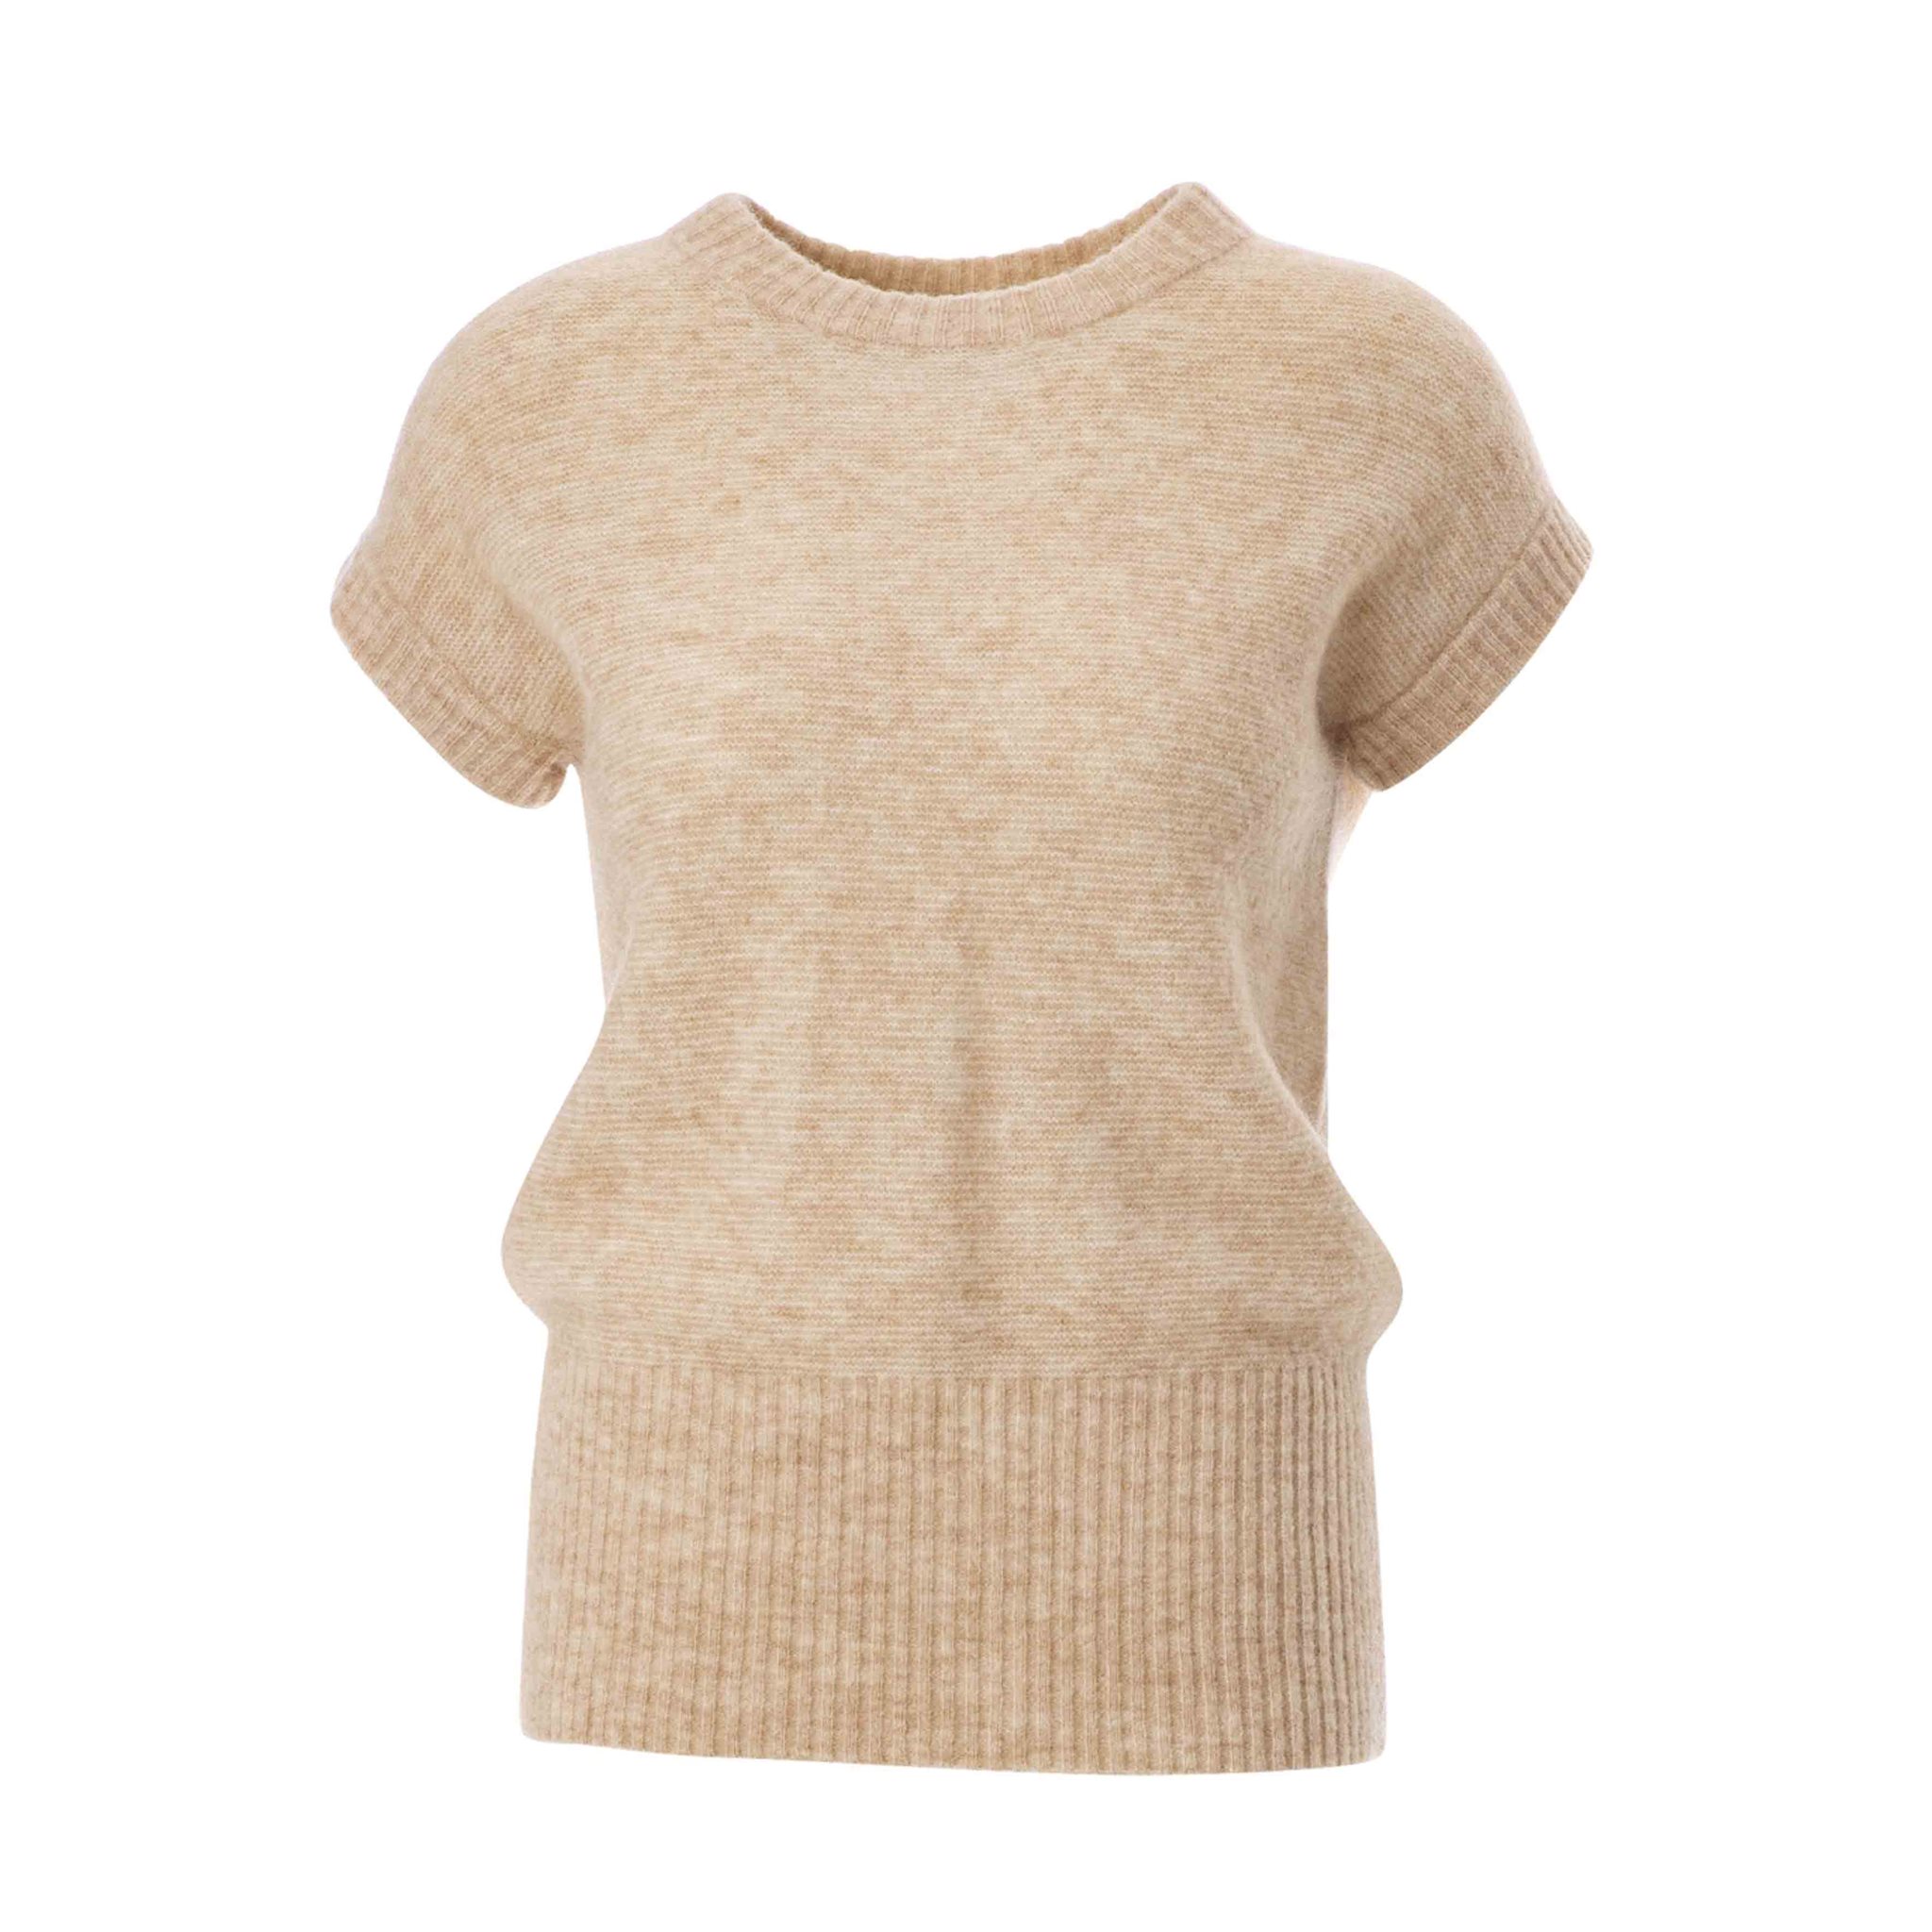 Ping sweater Jc SOPHIE